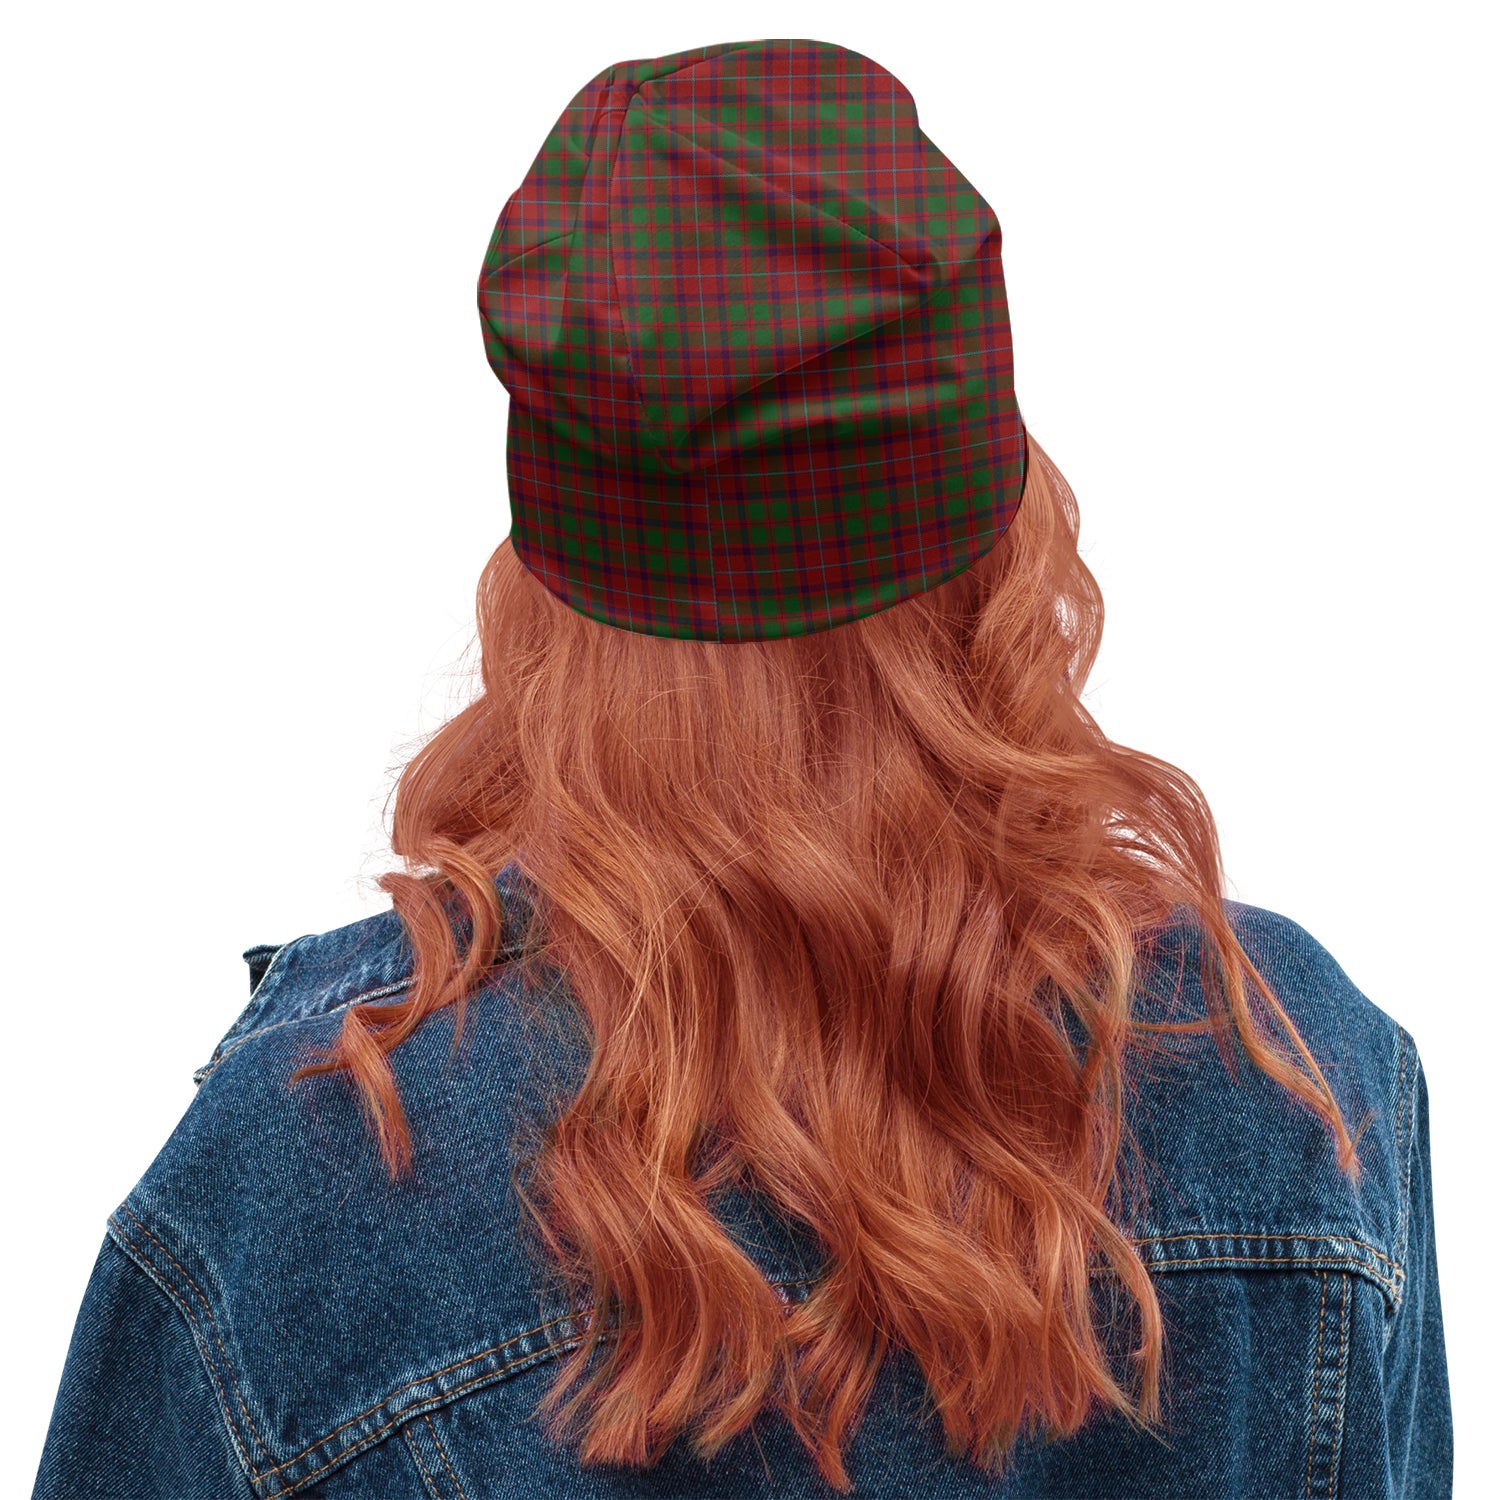 shaw-of-tordarroch-red-dress-tartan-beanies-hat-with-family-crest